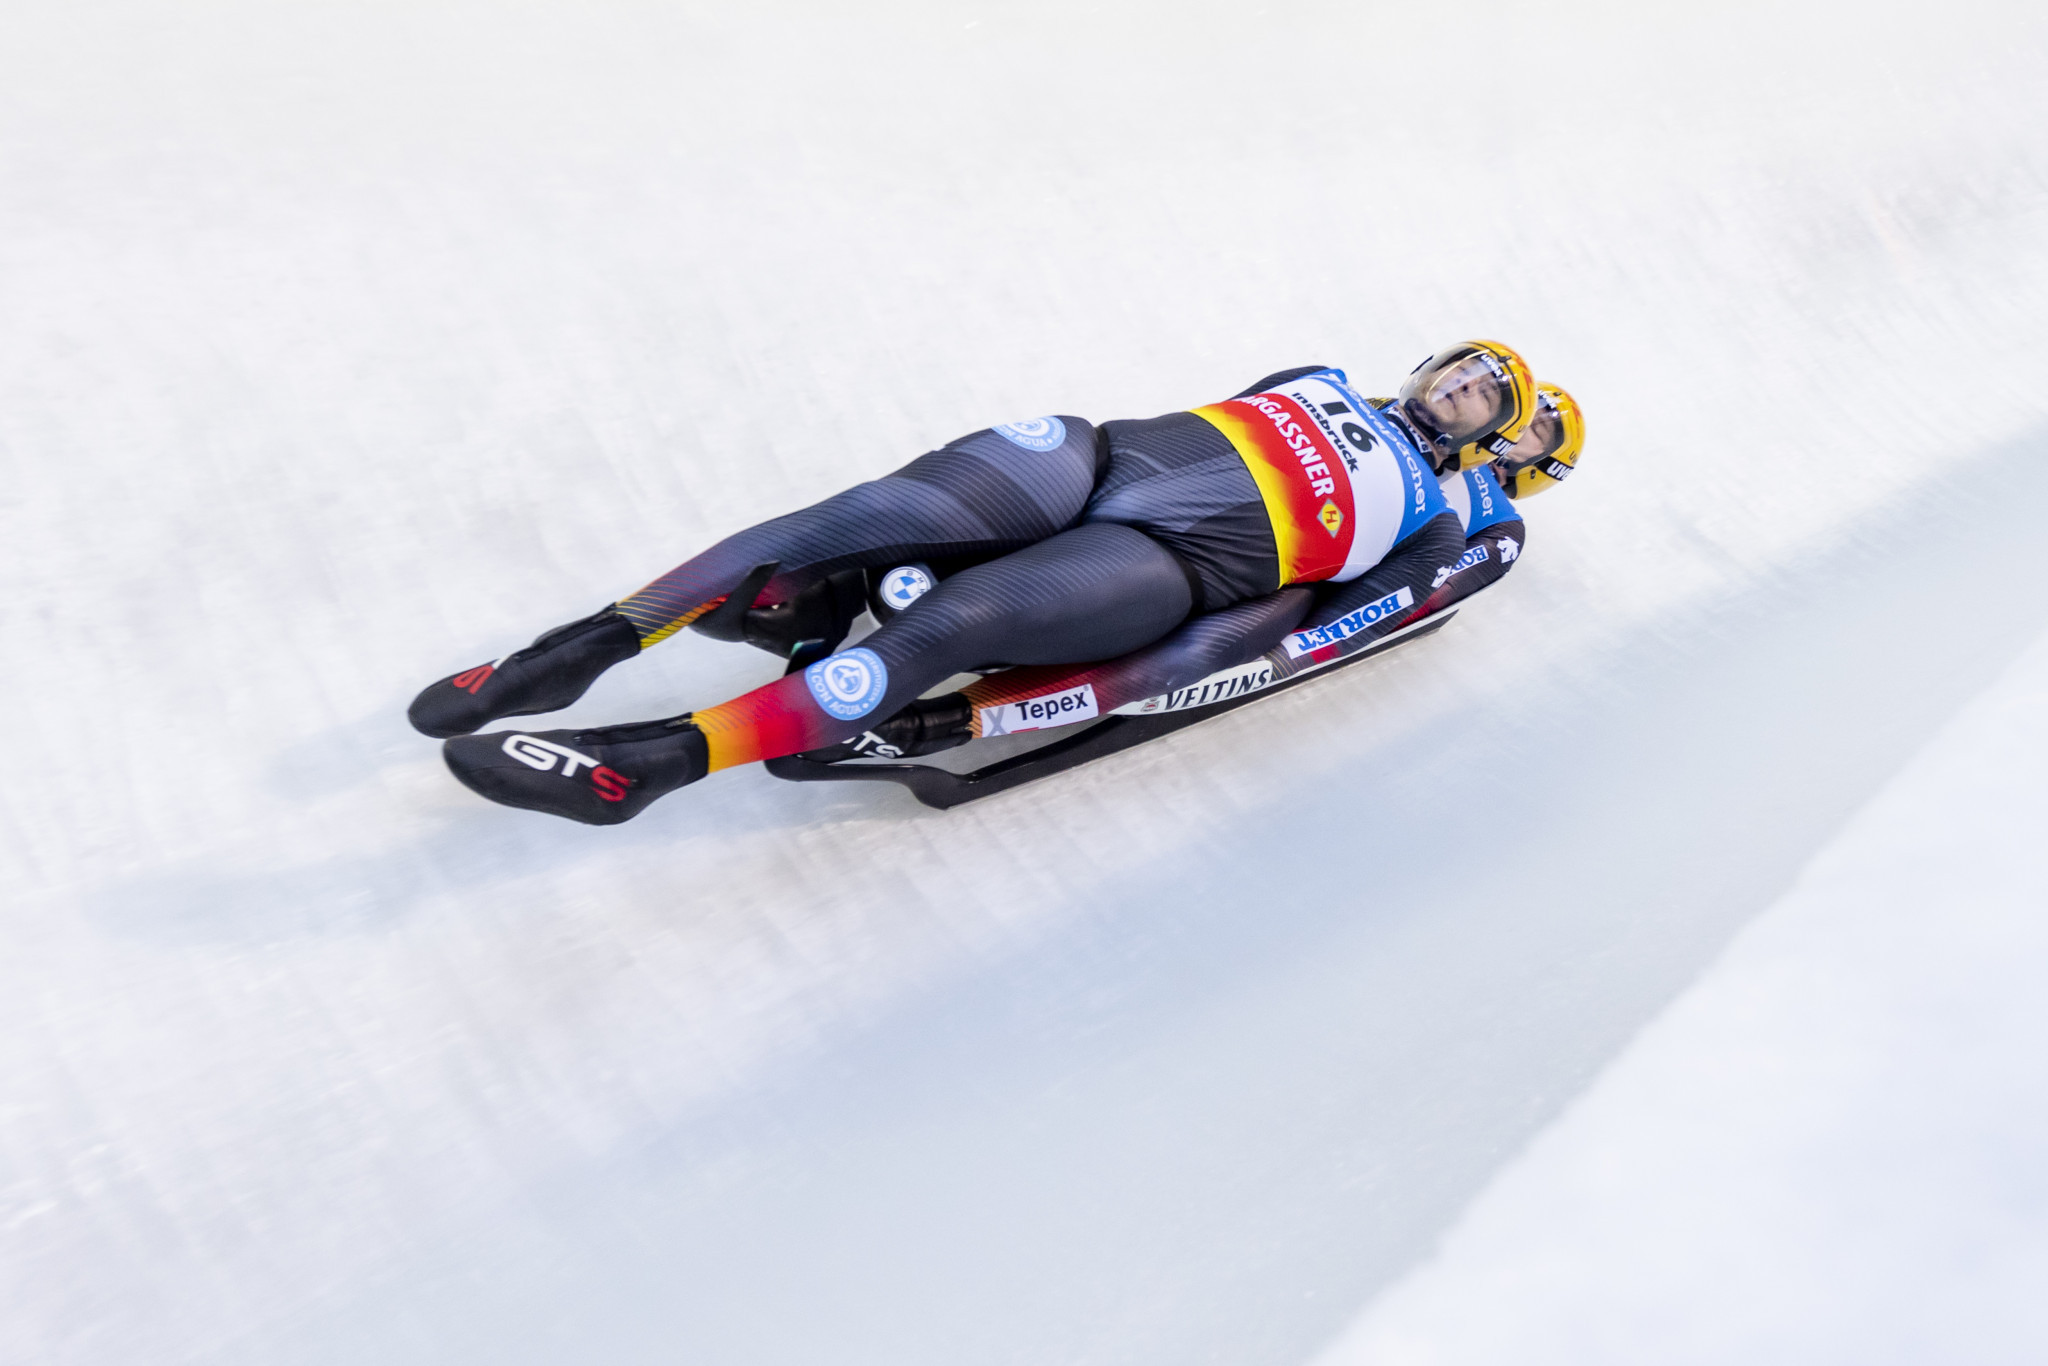 A ninth event has been re-added to the Luge World Cup schedule ©Getty Images